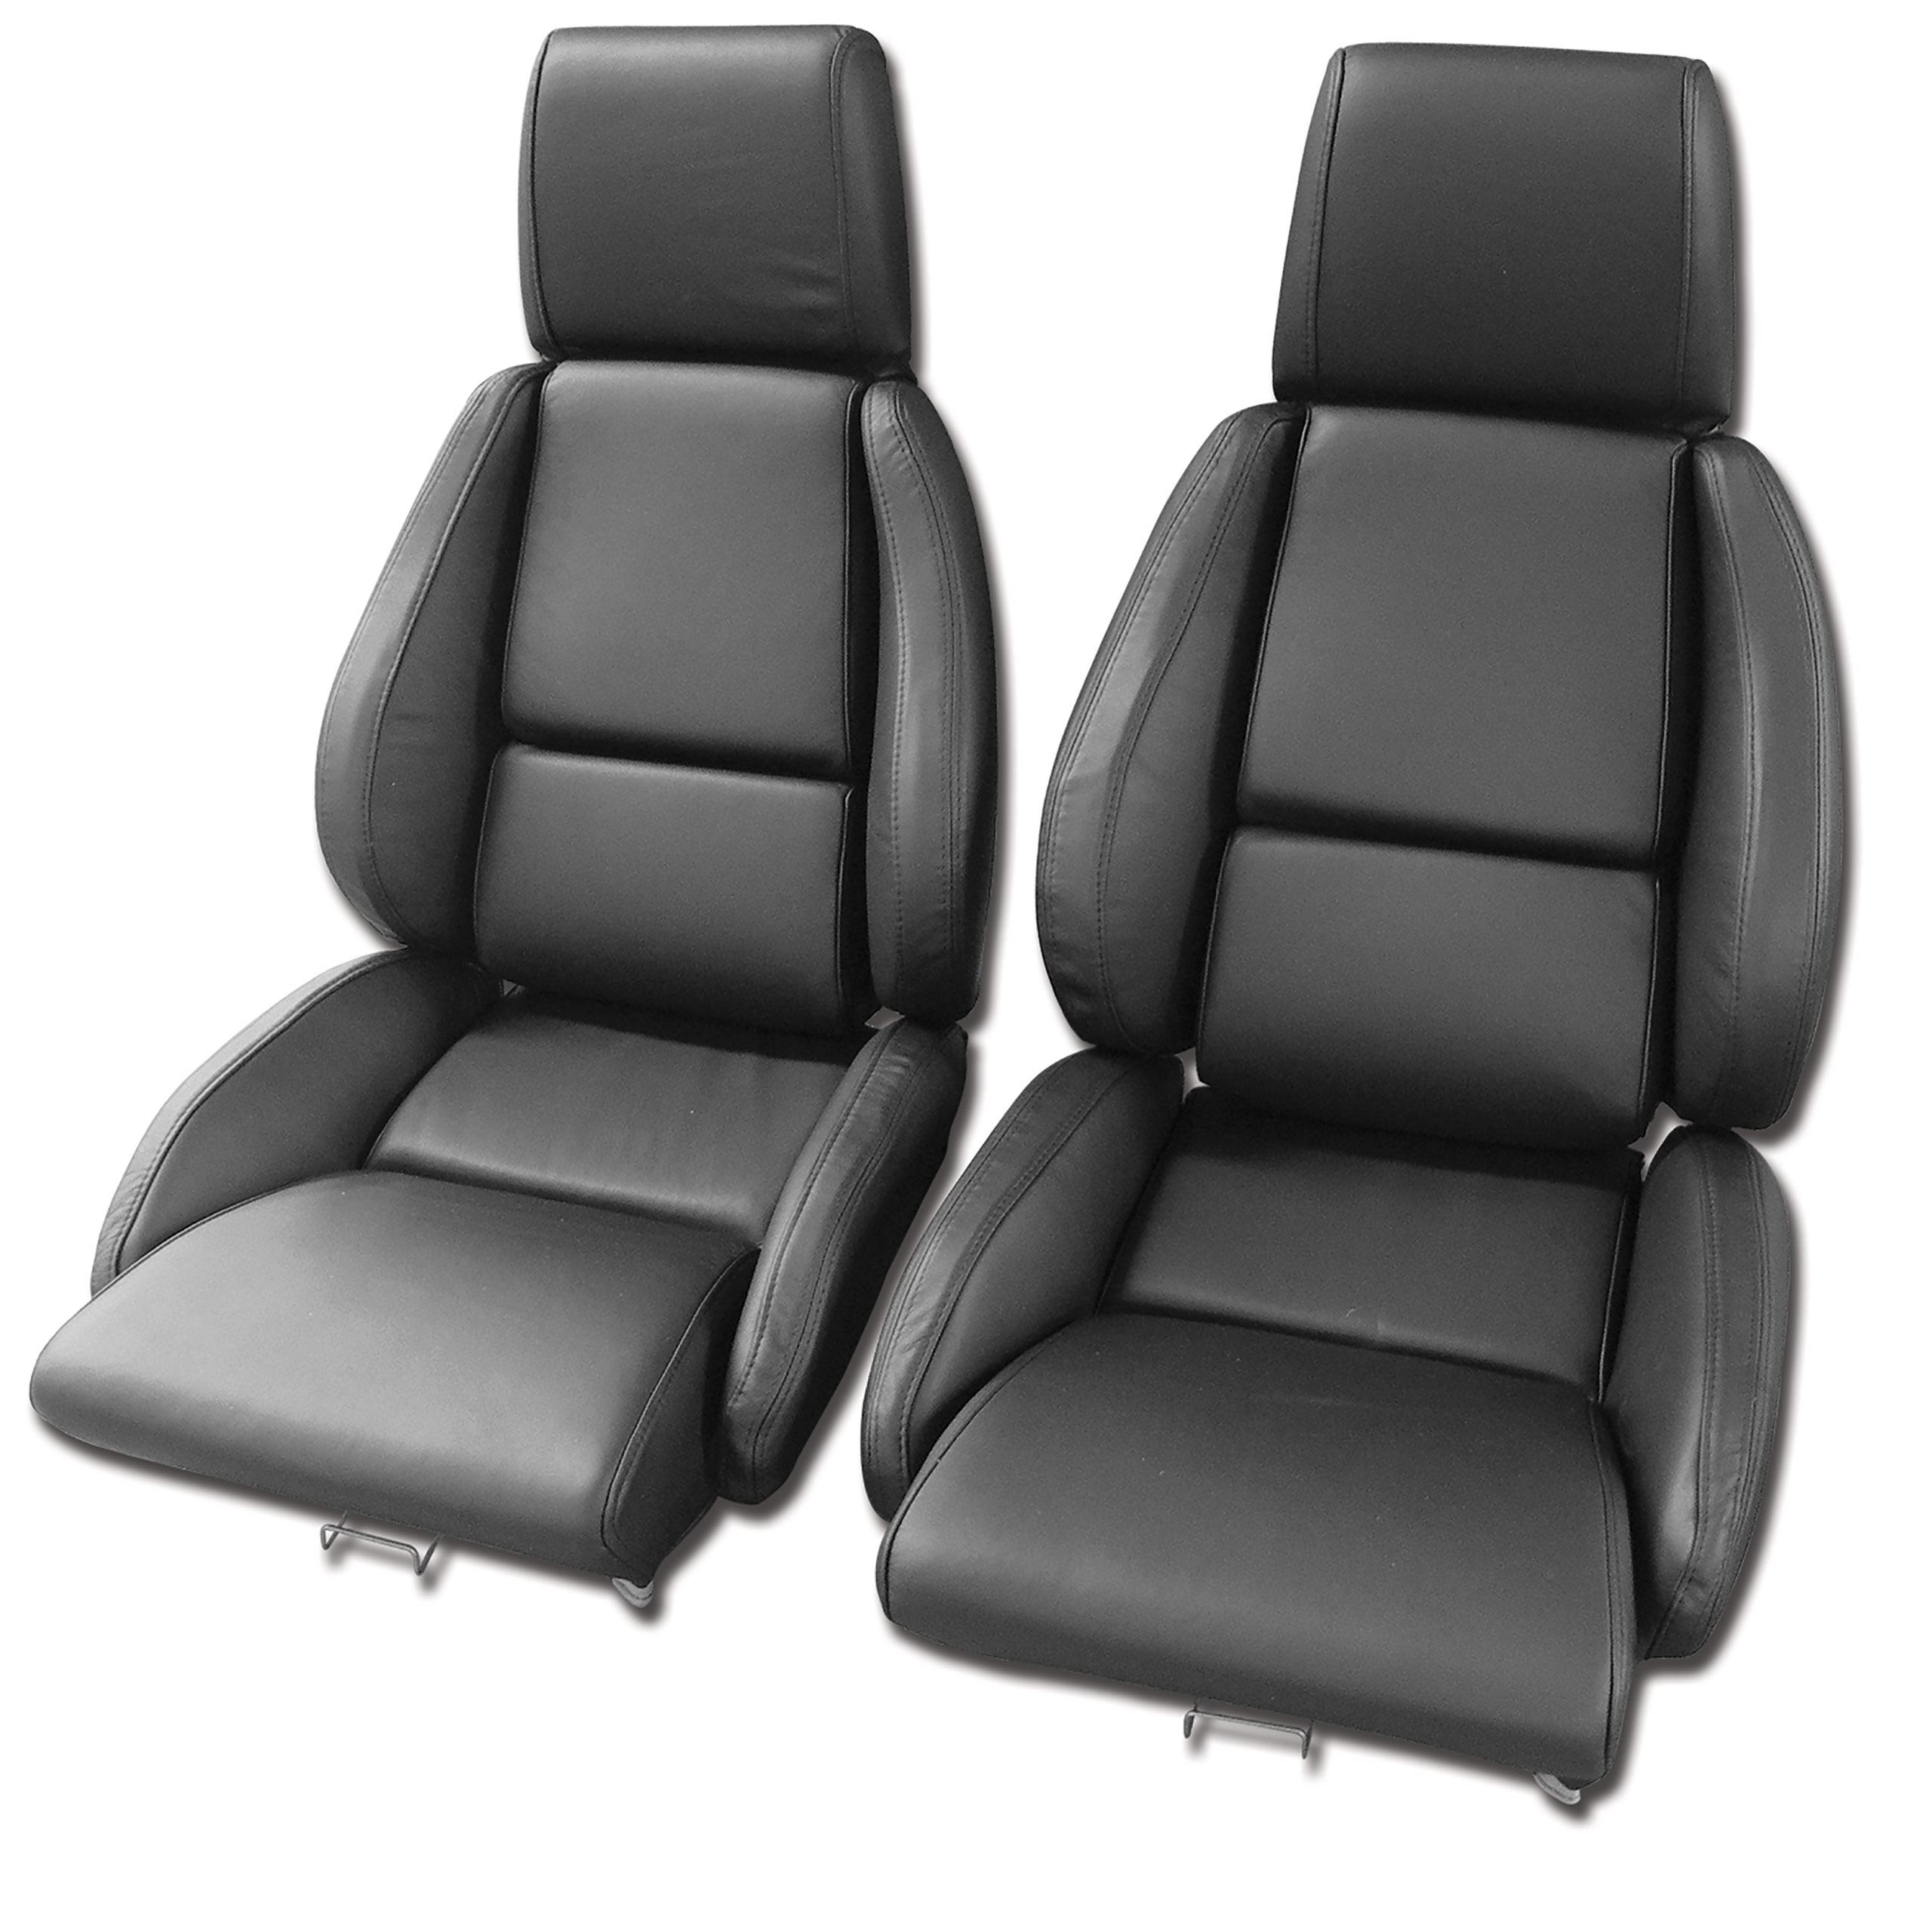 84-88 Corvette C4 468820 Mounted Leather-Like Vinyl Seat Covers Black Standard No-Perforations CA-468420 